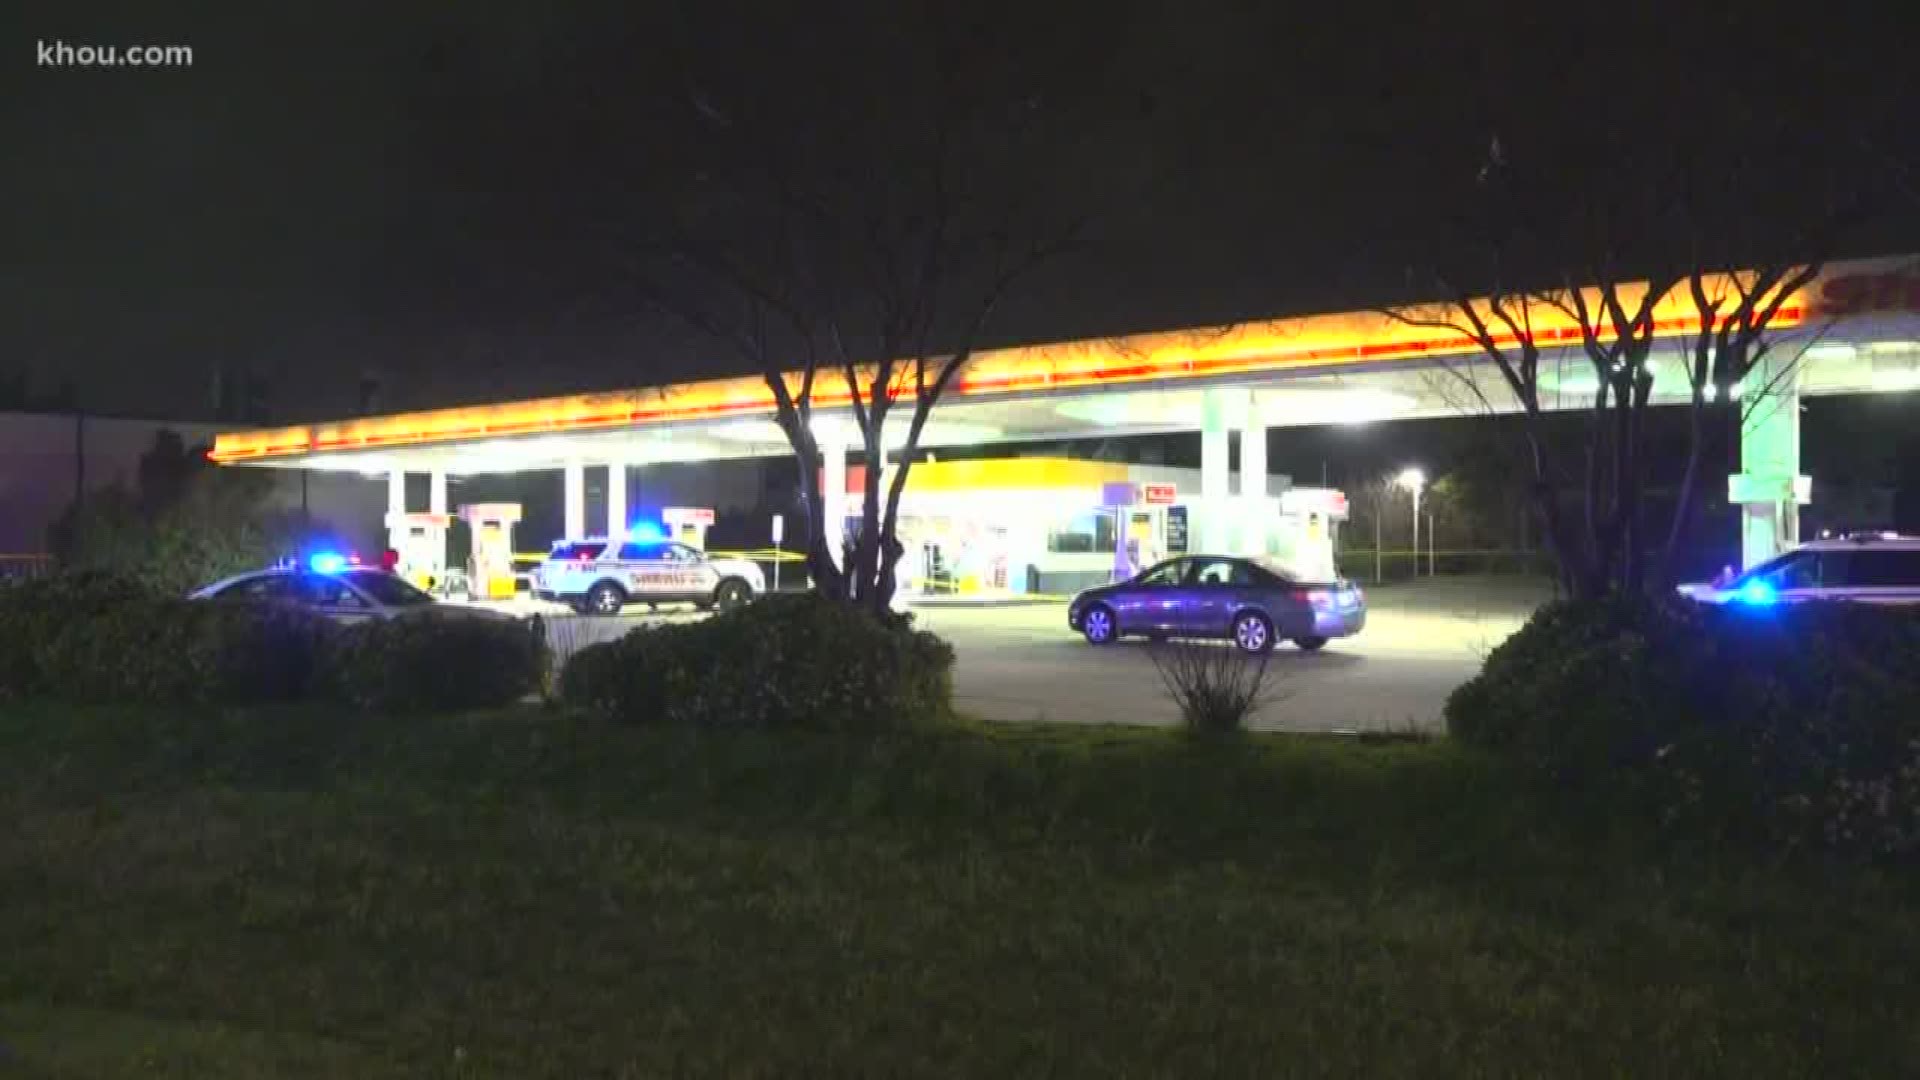 A woman was shot and killed at a convenience store in northwest Harris County, Sheriff Ed Gonzalez said late Friday night.